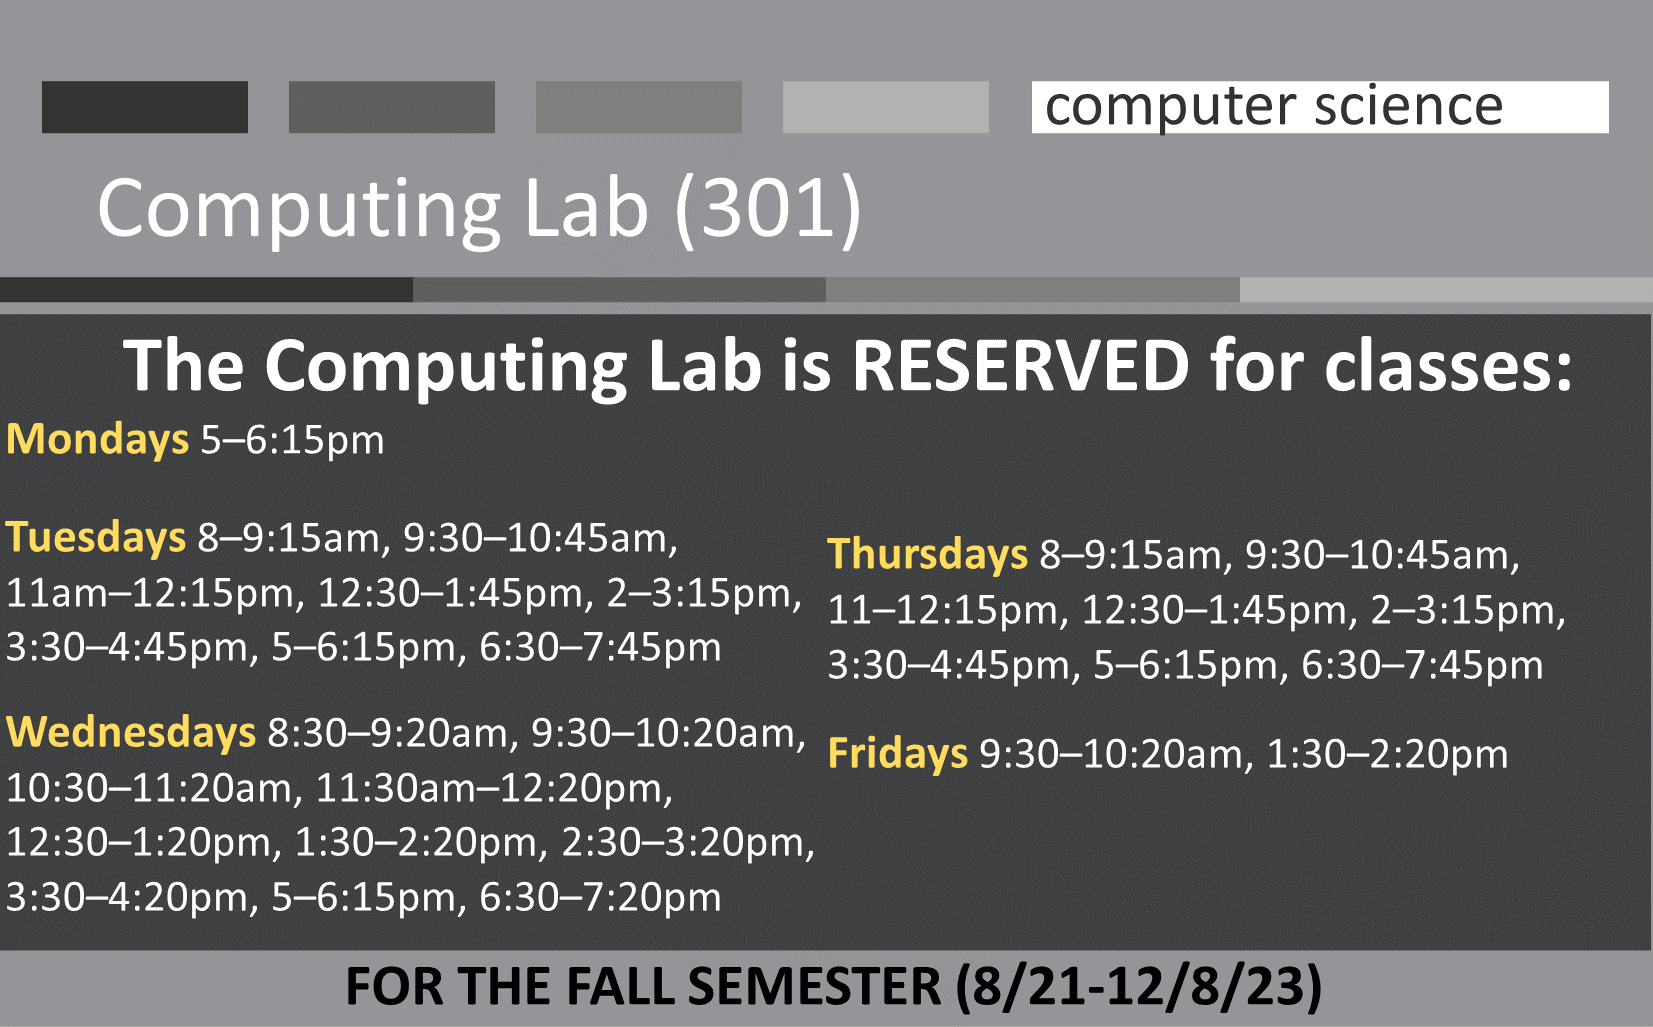 The Computing Lab is RESERVED for classes FOR THE FALL SEMESTER (8/21-12/8/23) Mondays 5–6:15pm   Tuesdays 8–9:15am, 9:30–10:45am,   11am–12:15pm, 12:30–1:45pm, 2–3:15pm, 3:30–4:45pm, 5–6:15pm, 6:30–7:45pm  Wednesdays 8:30–9:20am, 9:30–10:20am, 10:30–11:20am, 11:30am–12:20pm,   12:30–1:20pm, 1:30–2:20pm, 2:30–3:20pm, 3:30–4:20pm, 5–6:15pm, 6:30–7:20pm   Thursdays 8–9:15am, 9:30–10:45am,      11–12:15pm, 12:30–1:45pm, 2–3:15pm, 3:30–4:45pm, 5–6:15pm, 6:30–7:45pm  Fridays 9:30–10:20am, 1:30–2:20pm